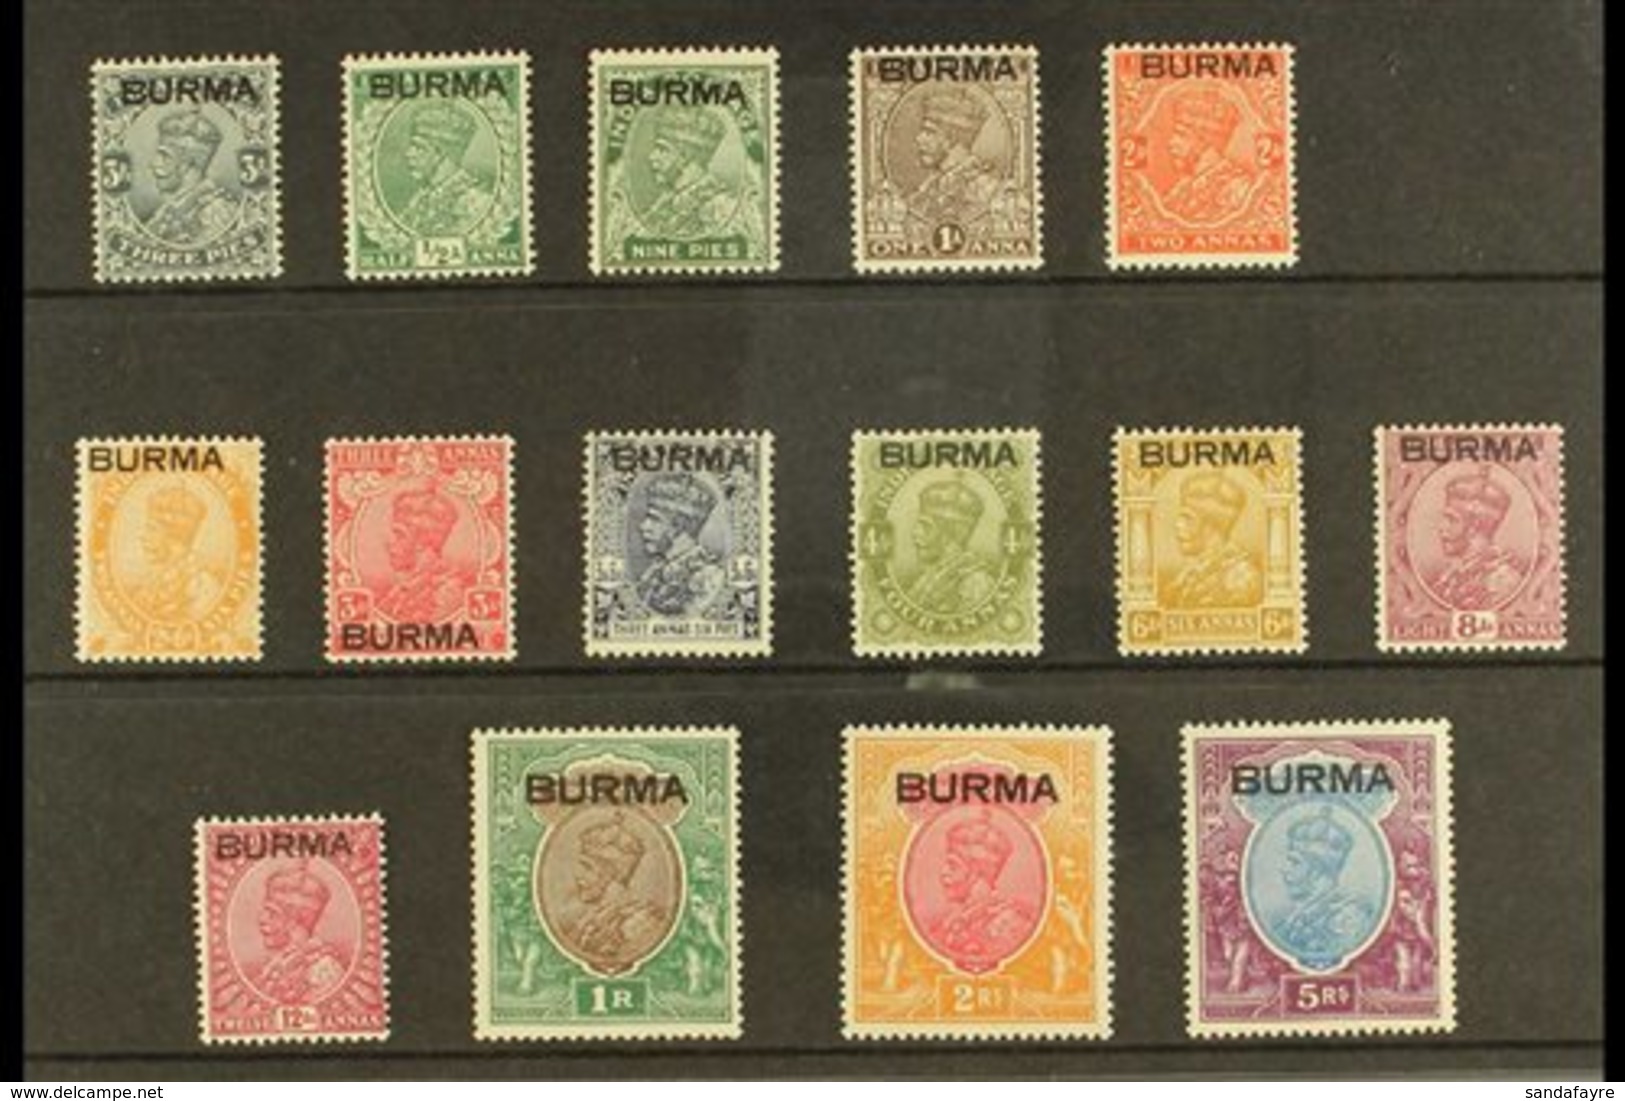 1937 MINT SELECTION On A Stock Card & Includes KGV Opt'd Set To 5r, SG 1/15, (3a With Tiny Thin) Very Fine Mint (15 Stam - Birmania (...-1947)